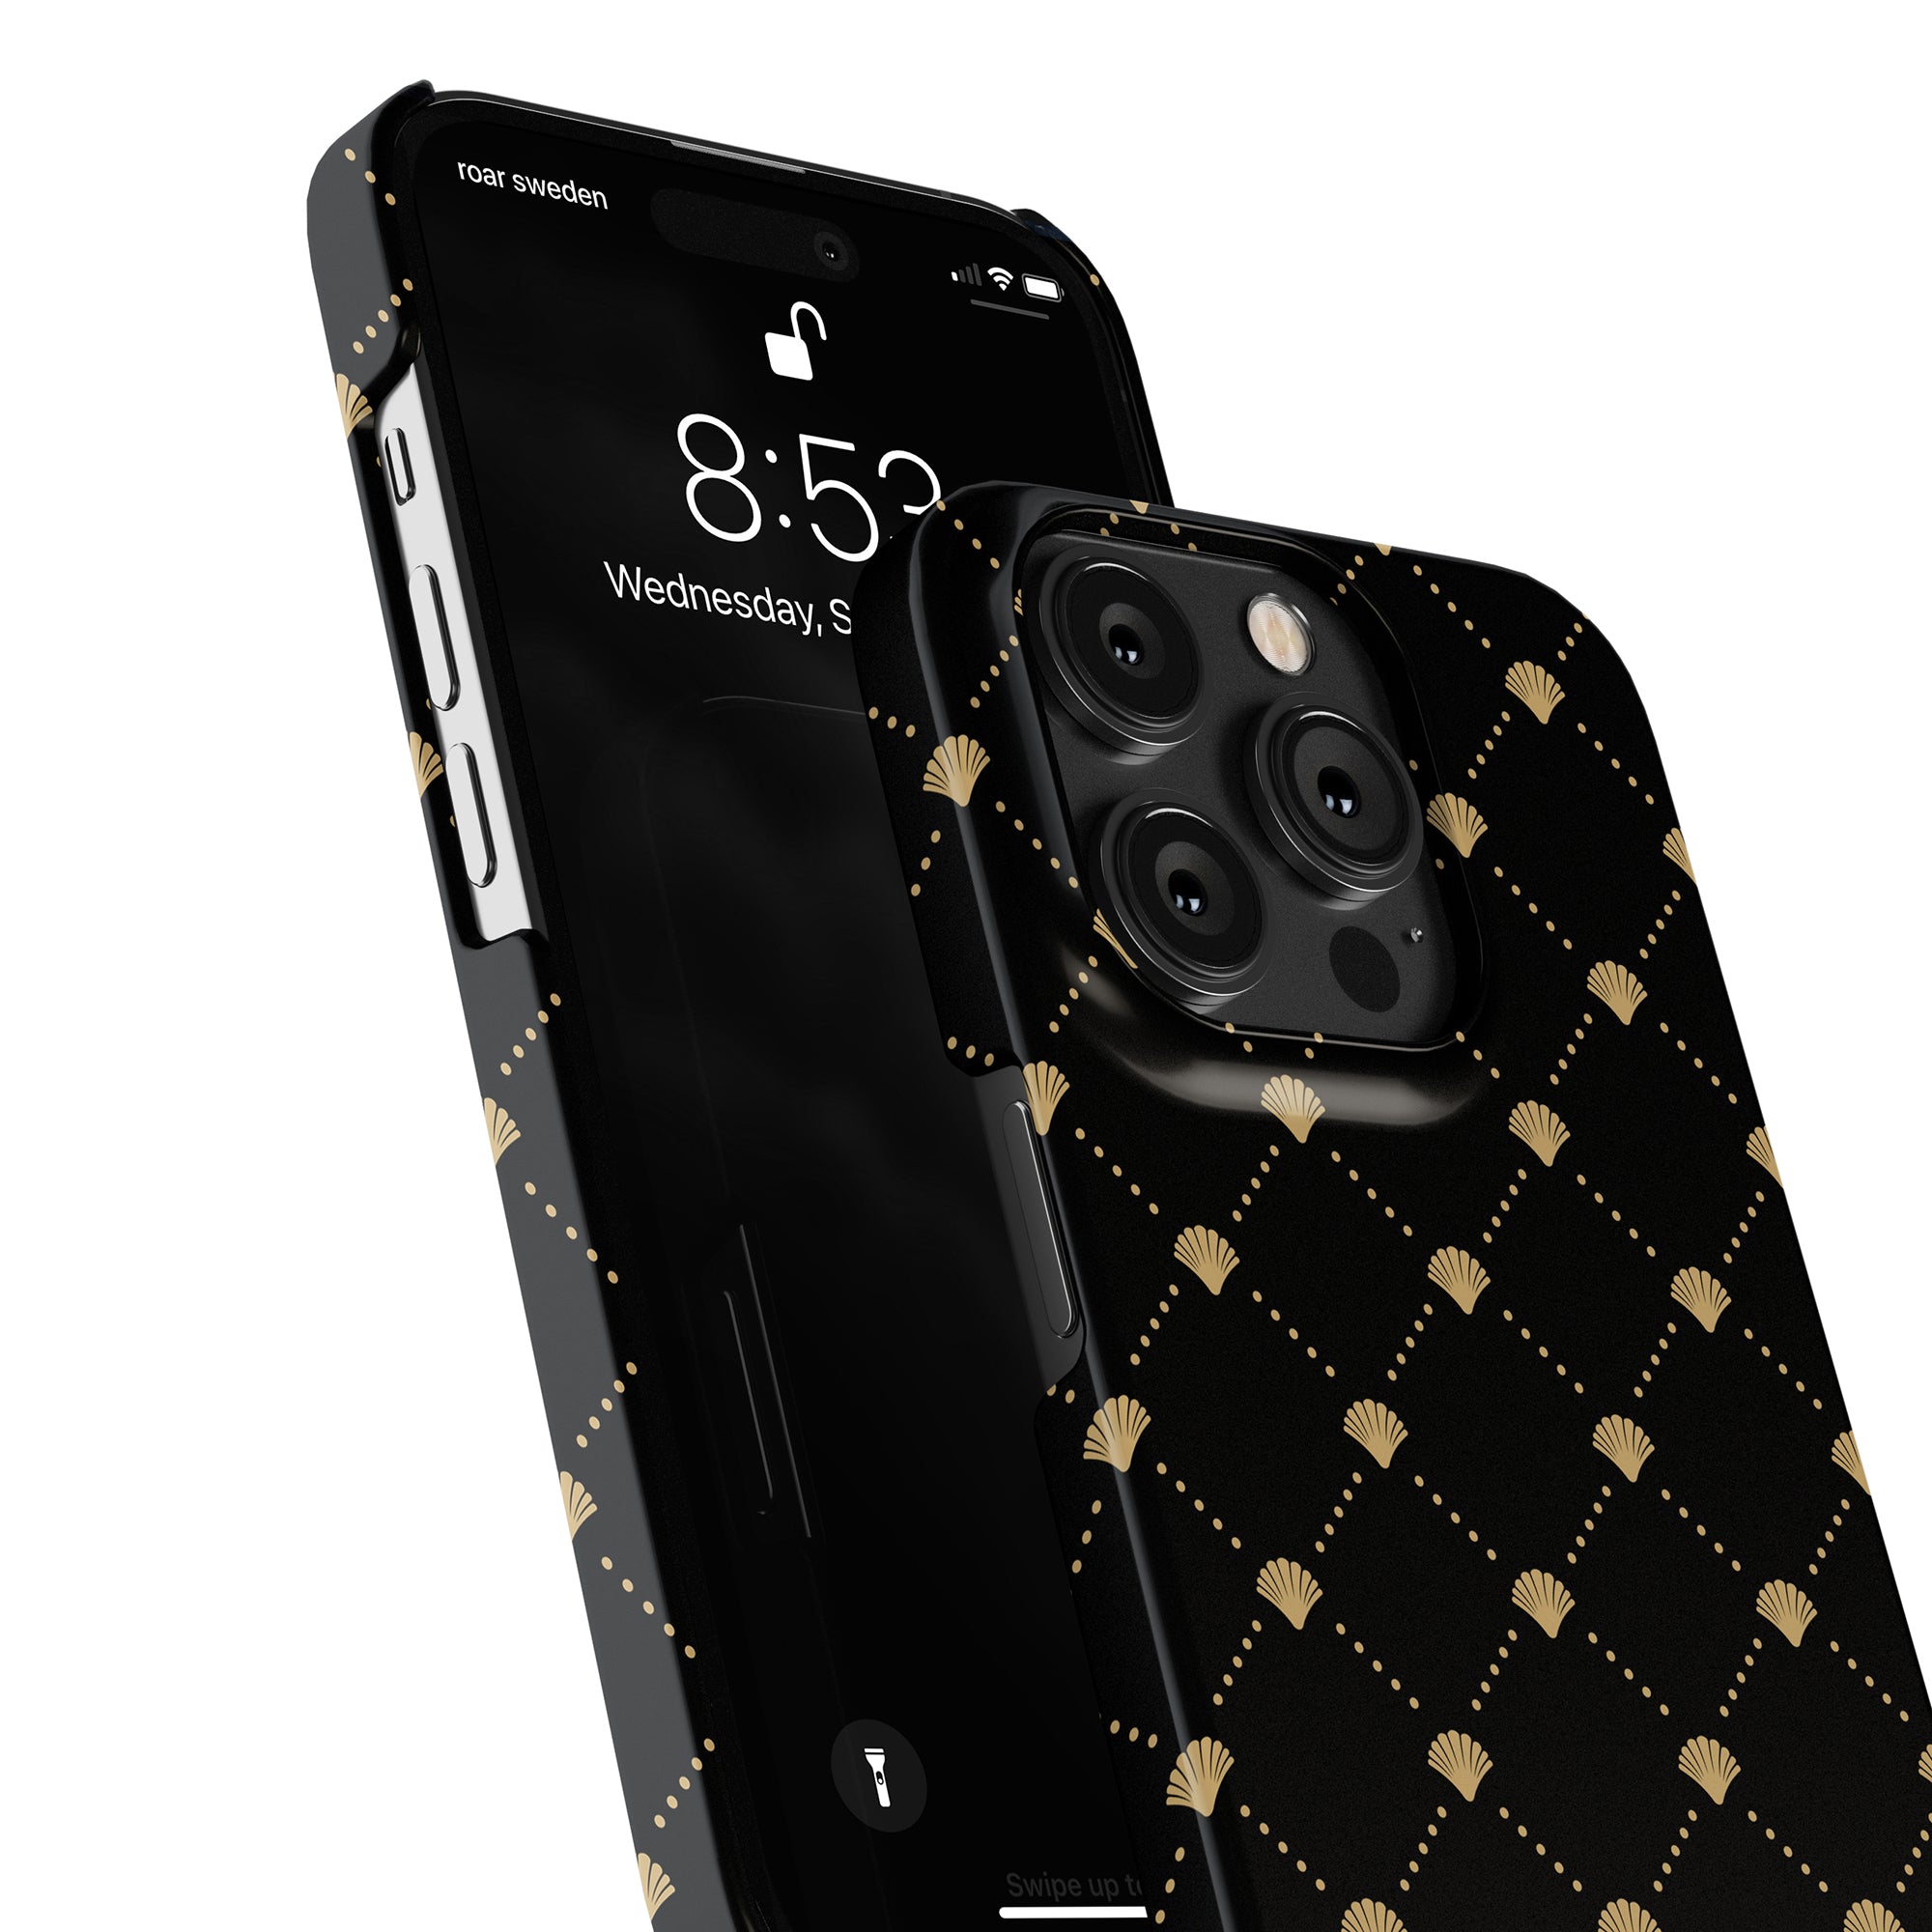 Close-up of a black smartphone with a decorative Luxe Shells Black - Slim case from the Ocean Collection, displaying a locked screen showing the time 8:53 and the date Wednesday, September 5.